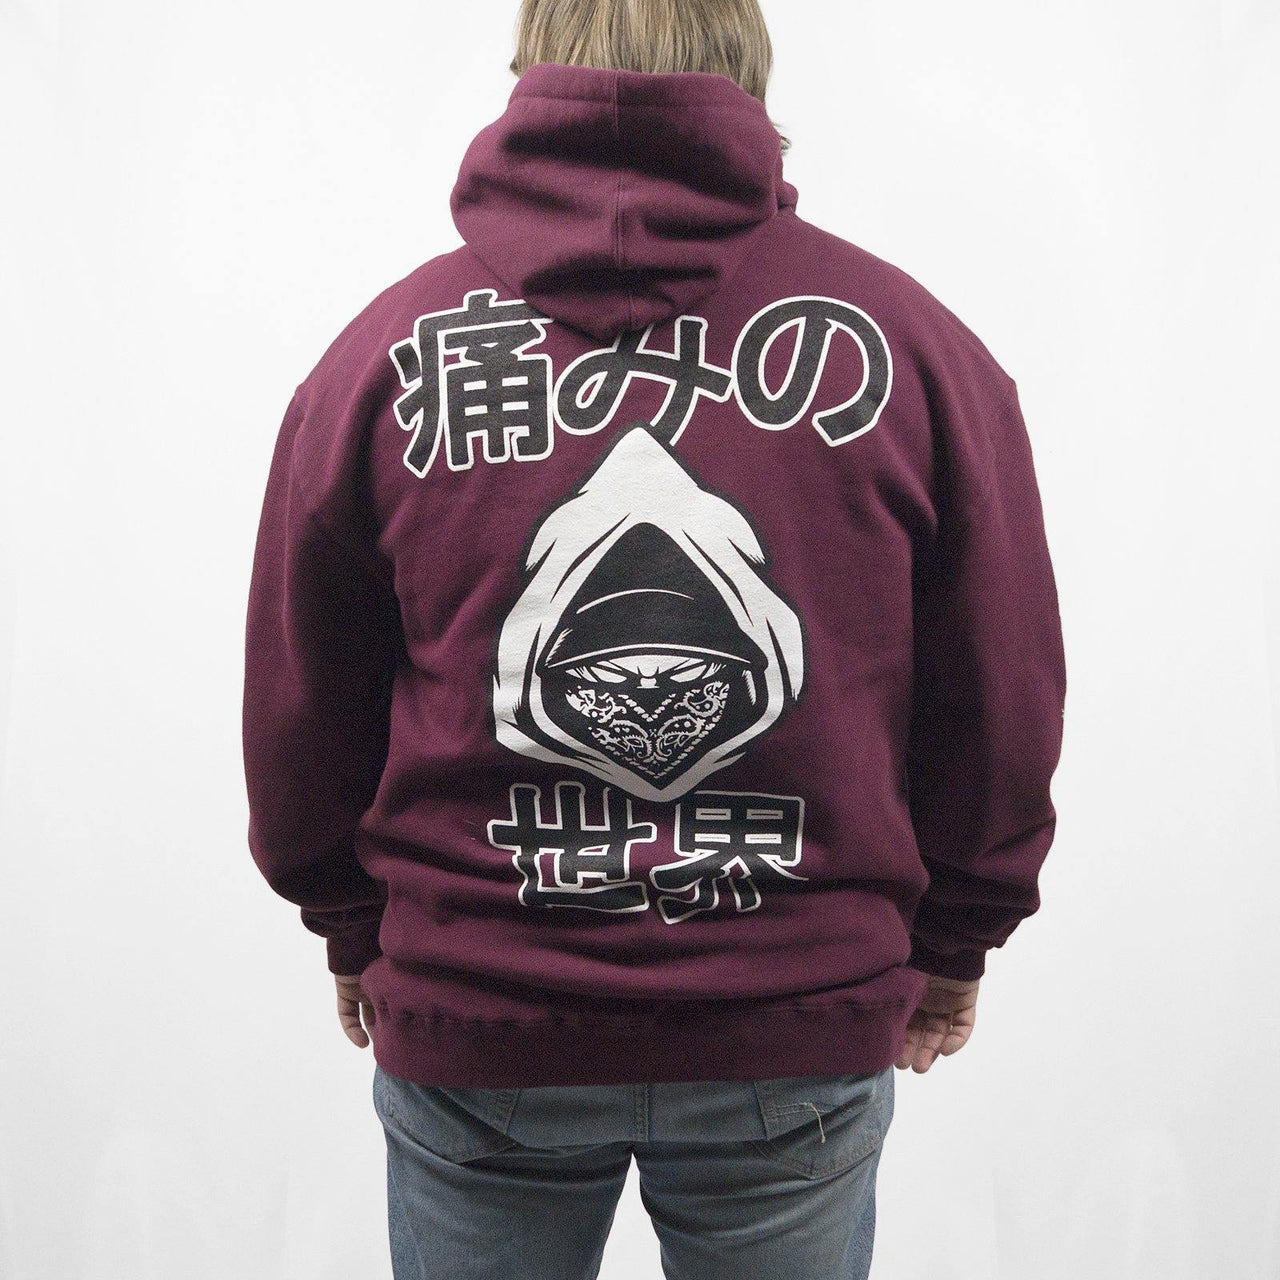 Buy – World of Pain "Japanese" Hoodie – Band & Music Merch – Cold Cuts Merch